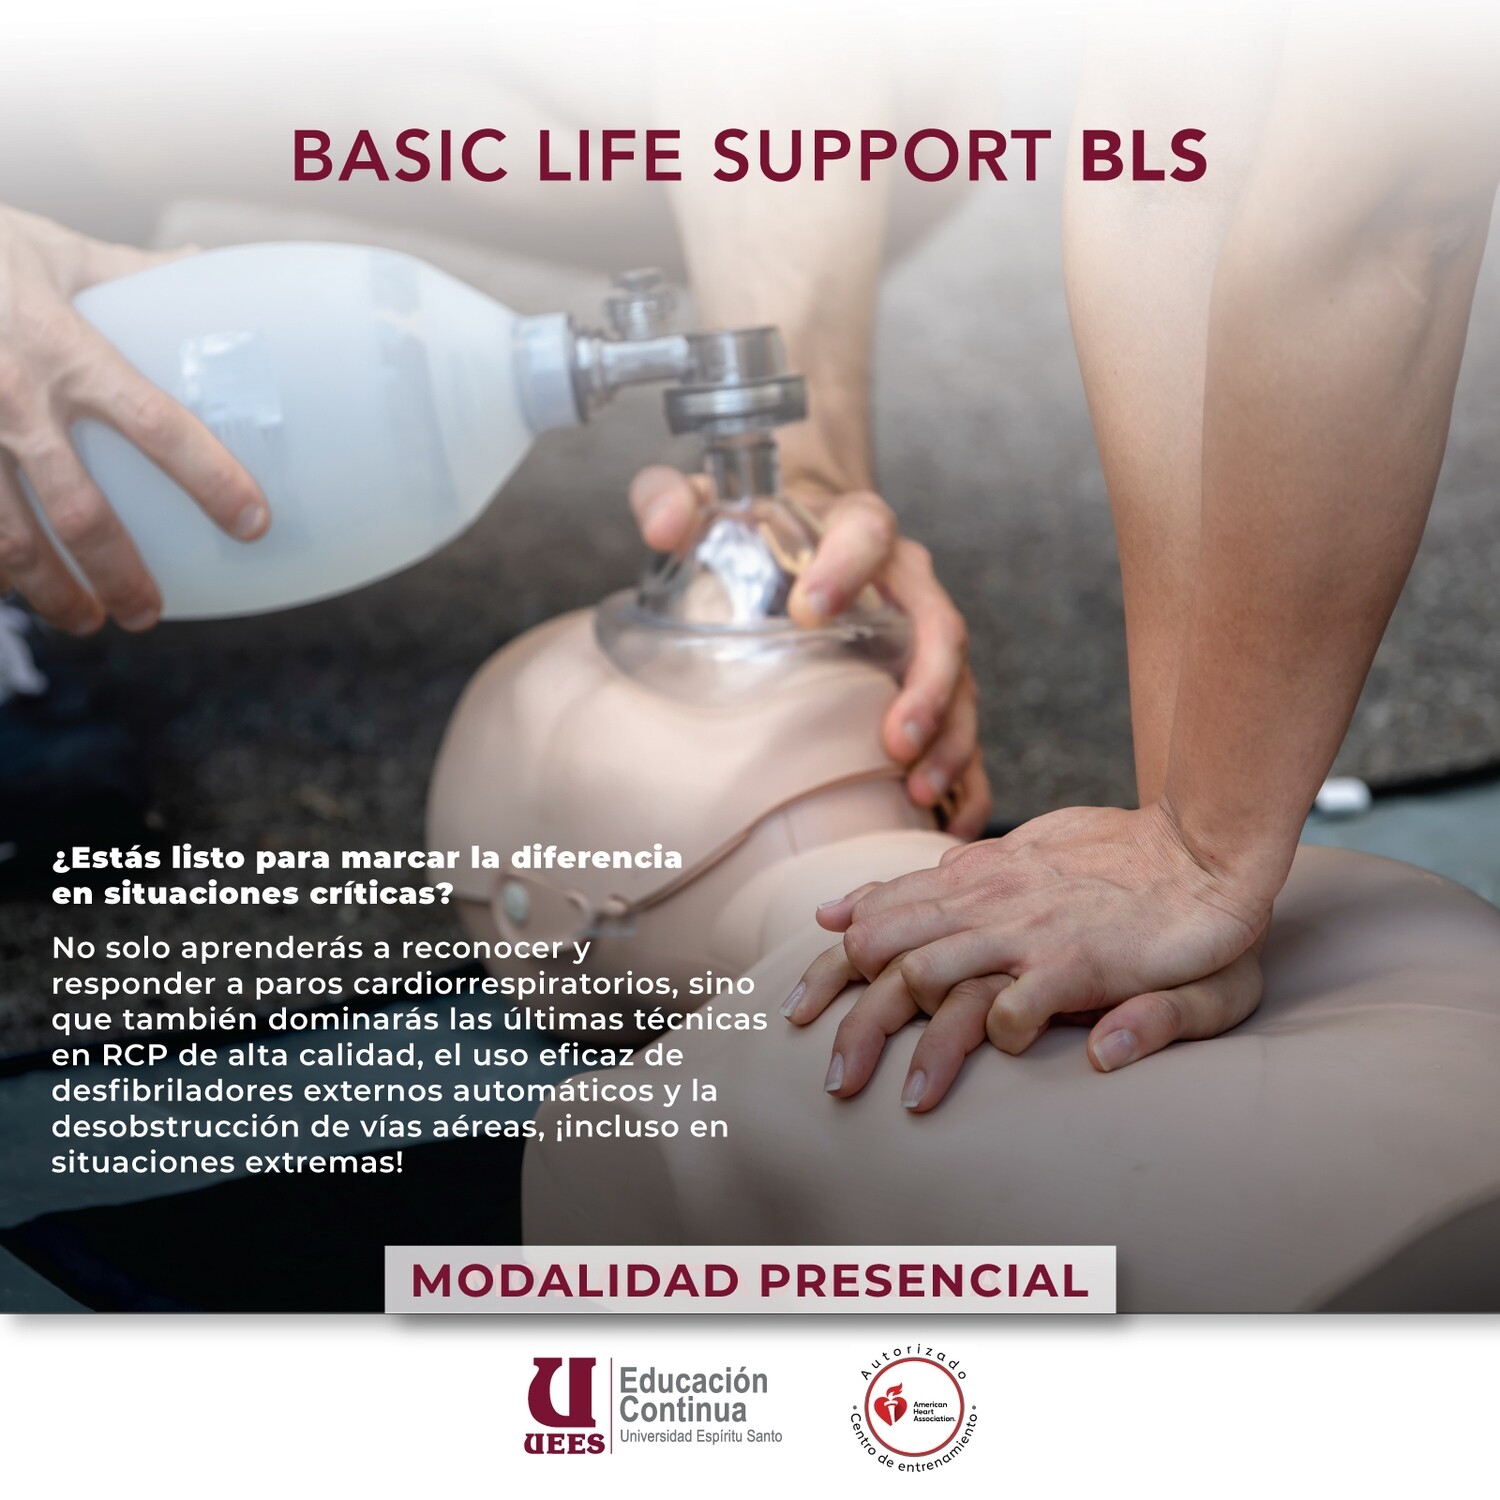 BASIC LIFE SUPPORT BLS